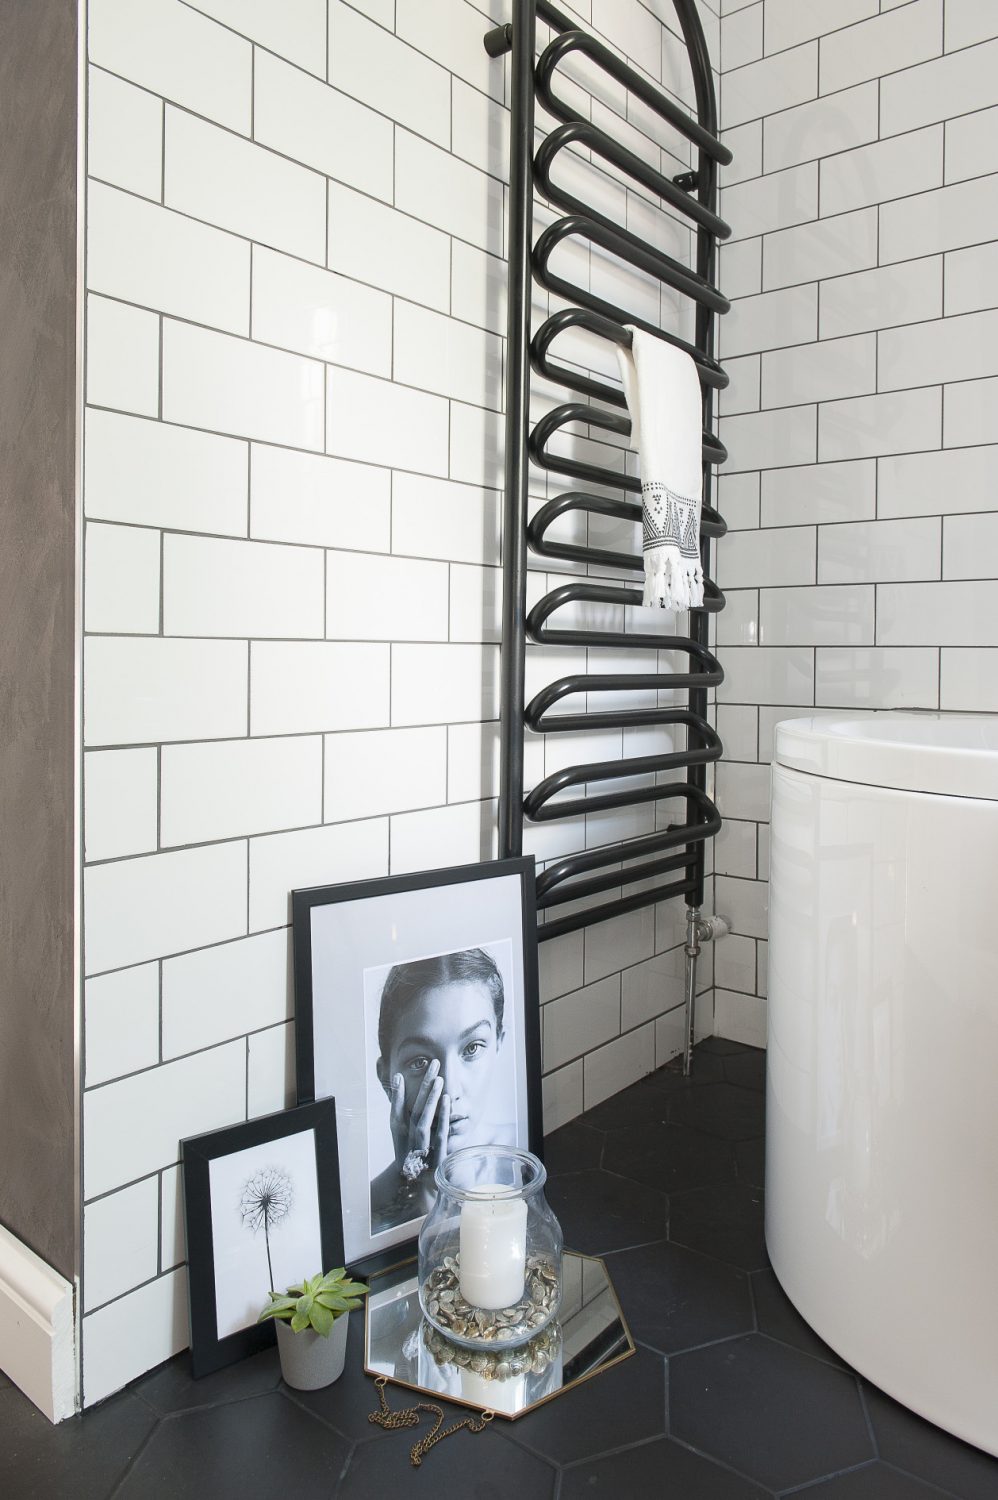 Liking its shape, Lucinda painted the radiator in the main bathroom black and updated the basin unit with sample pots of Farrow & Ball